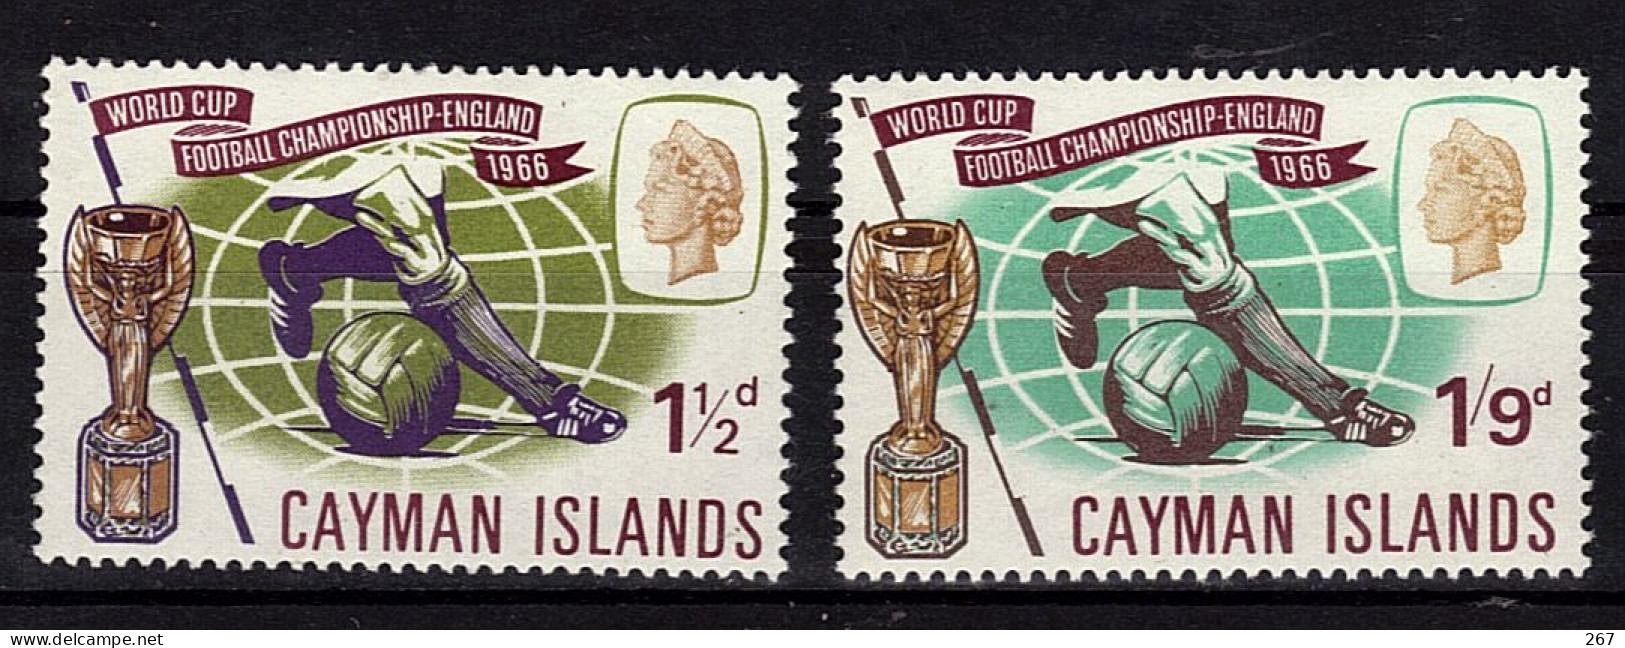 ILES CAIMANES  N° 186/87 * *  Cup 1966  Football  Soccer  Fussball - 1966 – Angleterre